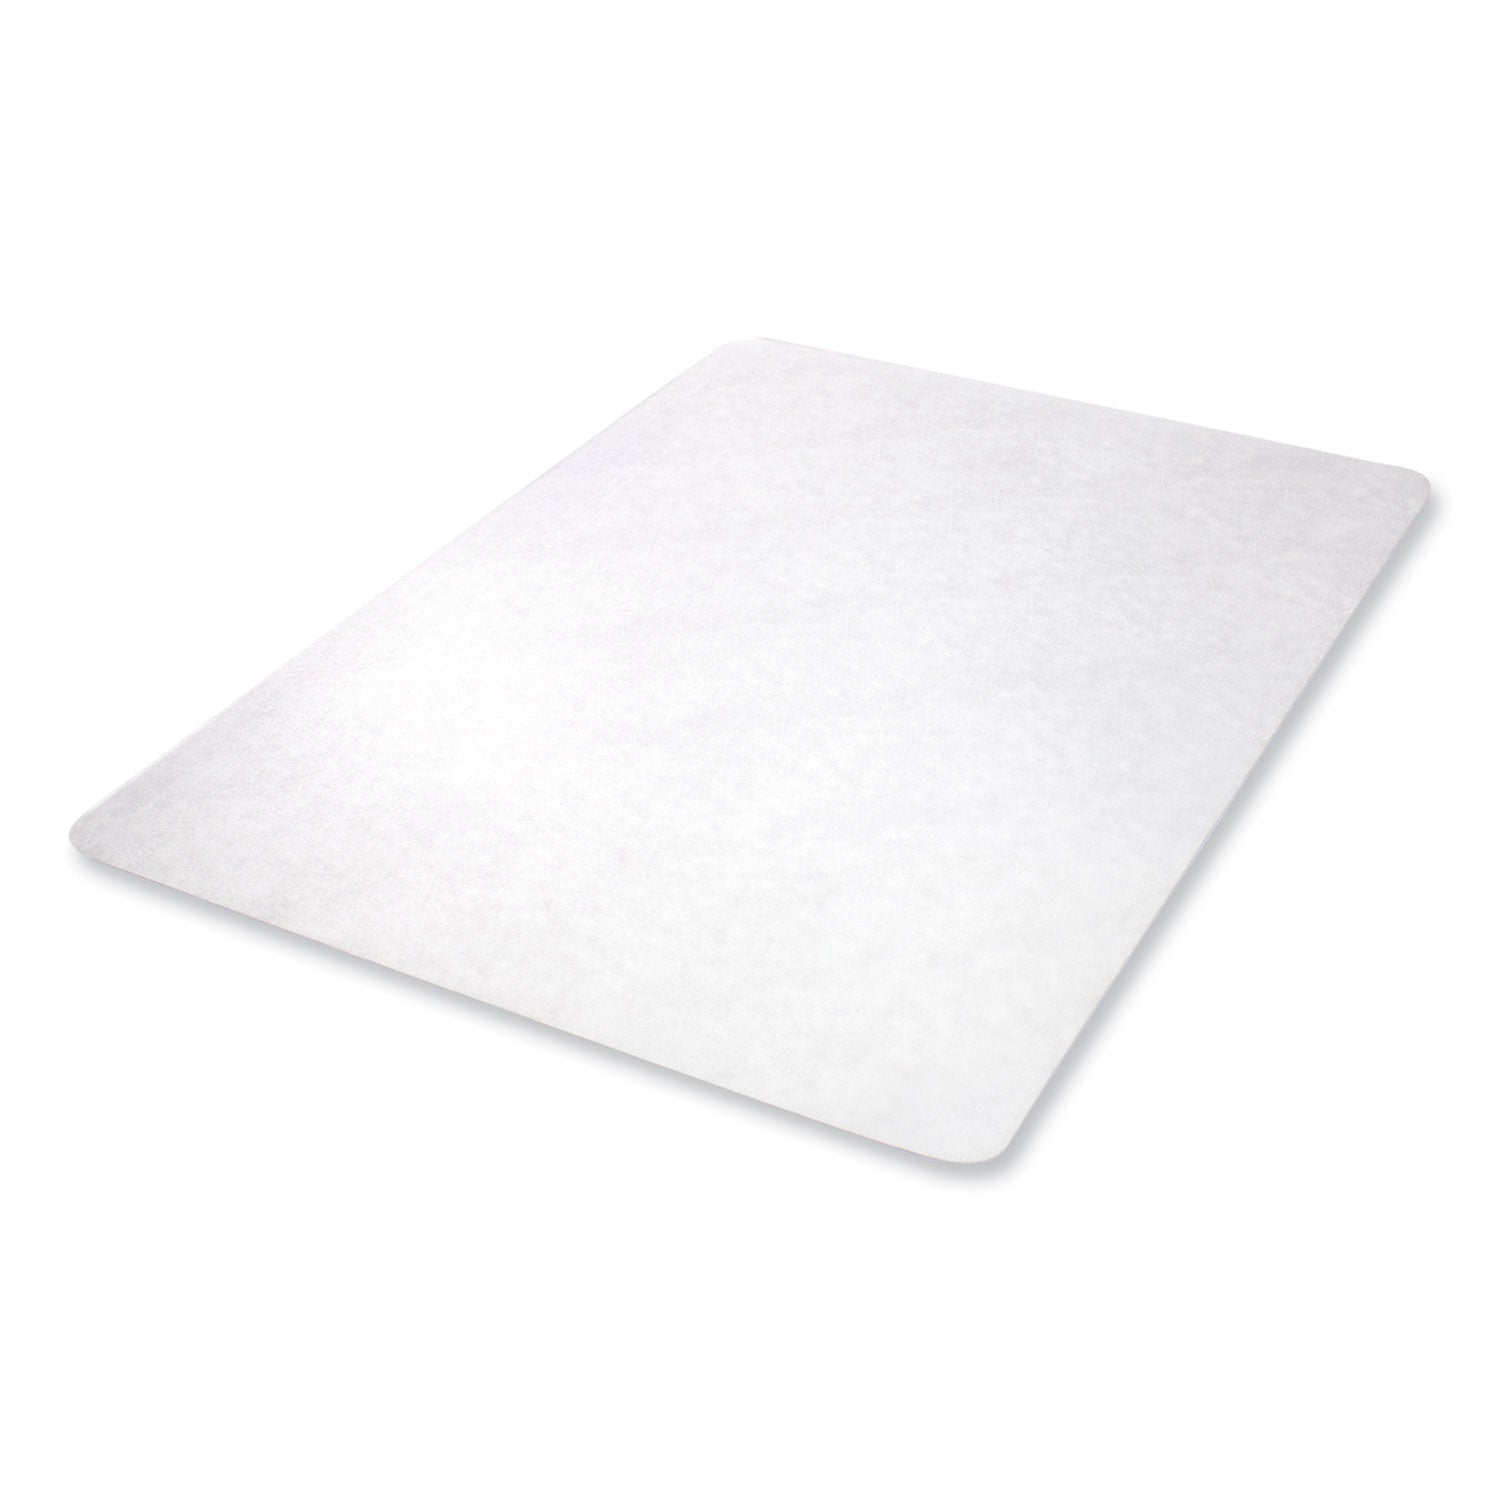 economat-all-day-use-chair-mat-for-hard-floors-flat-packed-36-x-48-clear_defcm2e142 - 6